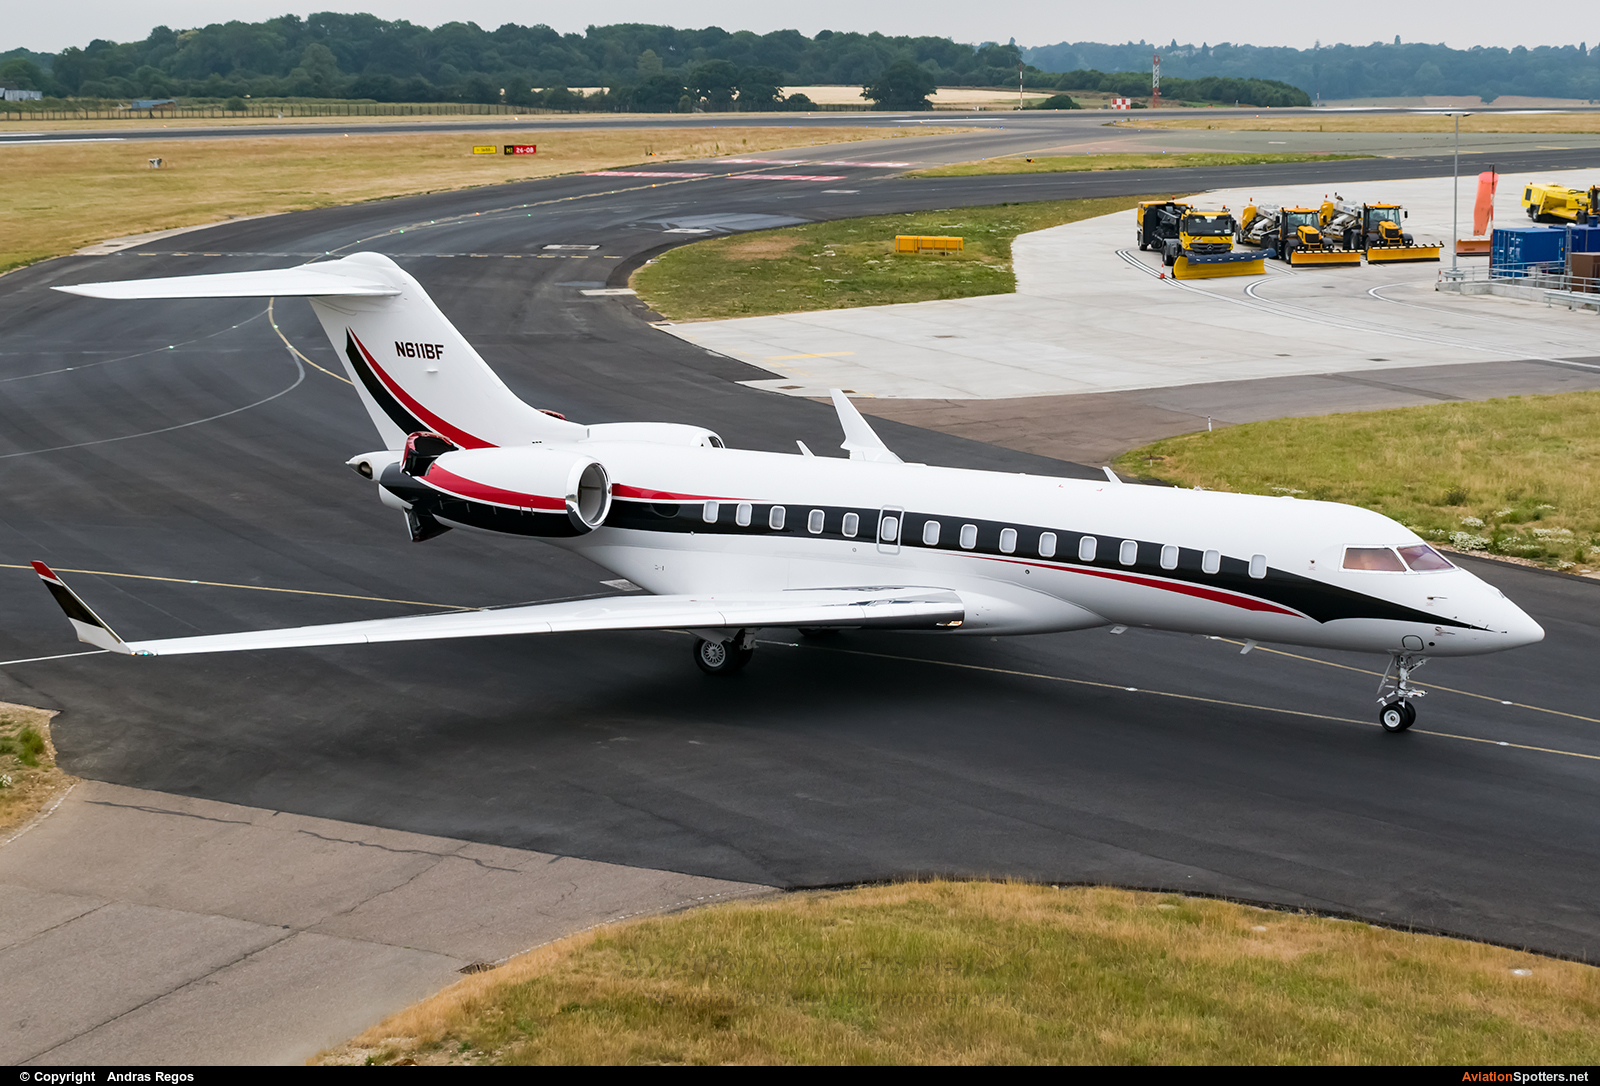 Private  -  BD-700-1A11 Global 6000  (N611BF) By Andras Regos (regos)